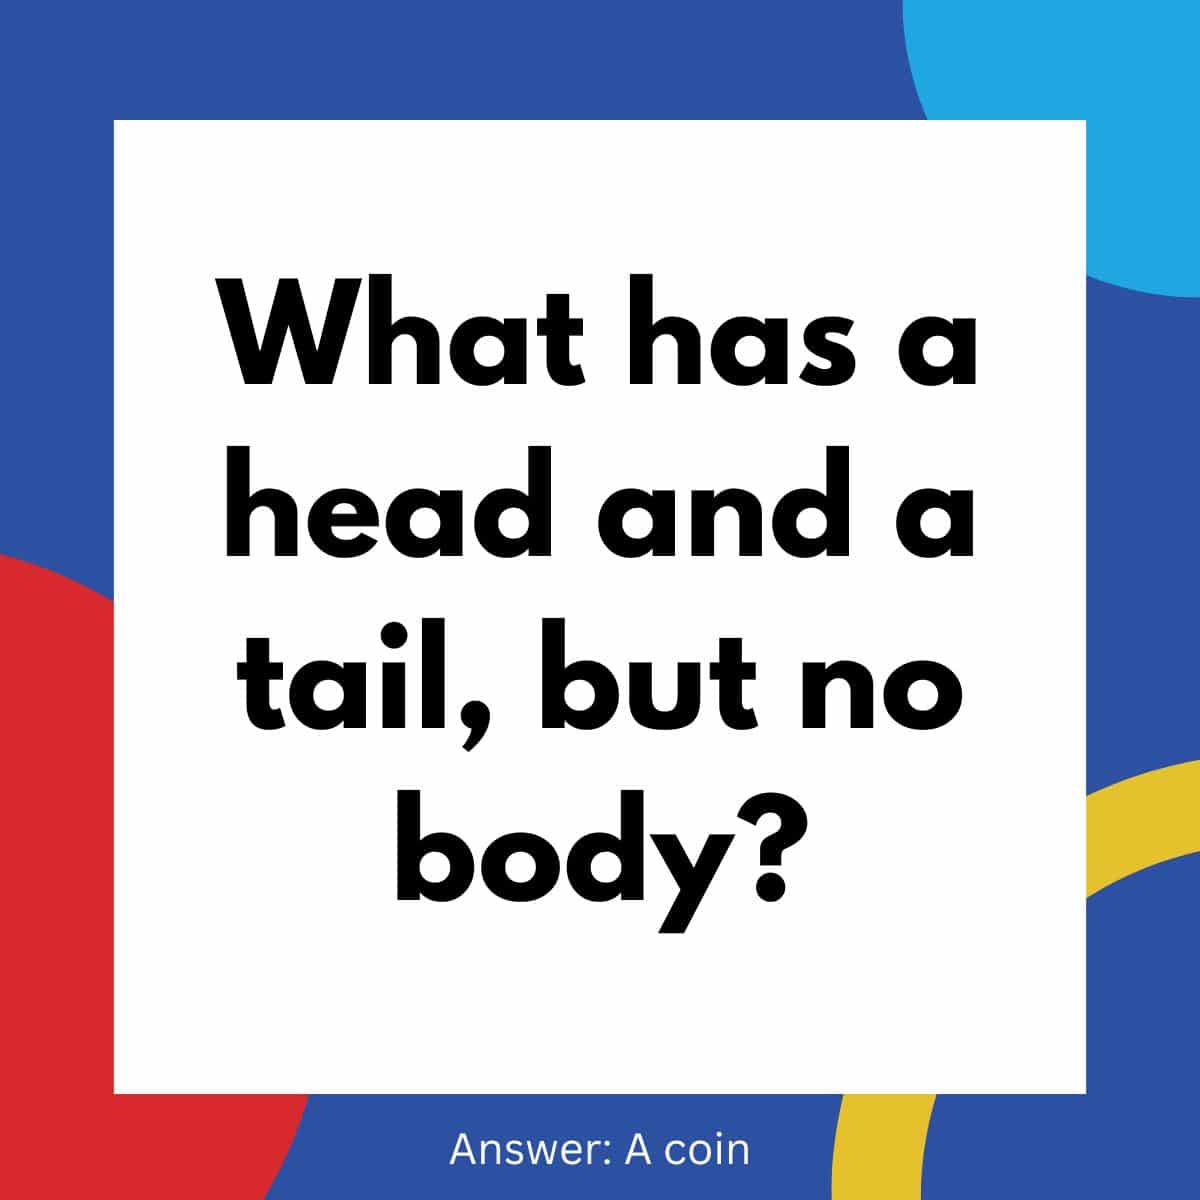 What has a head and a tail, but no body?.